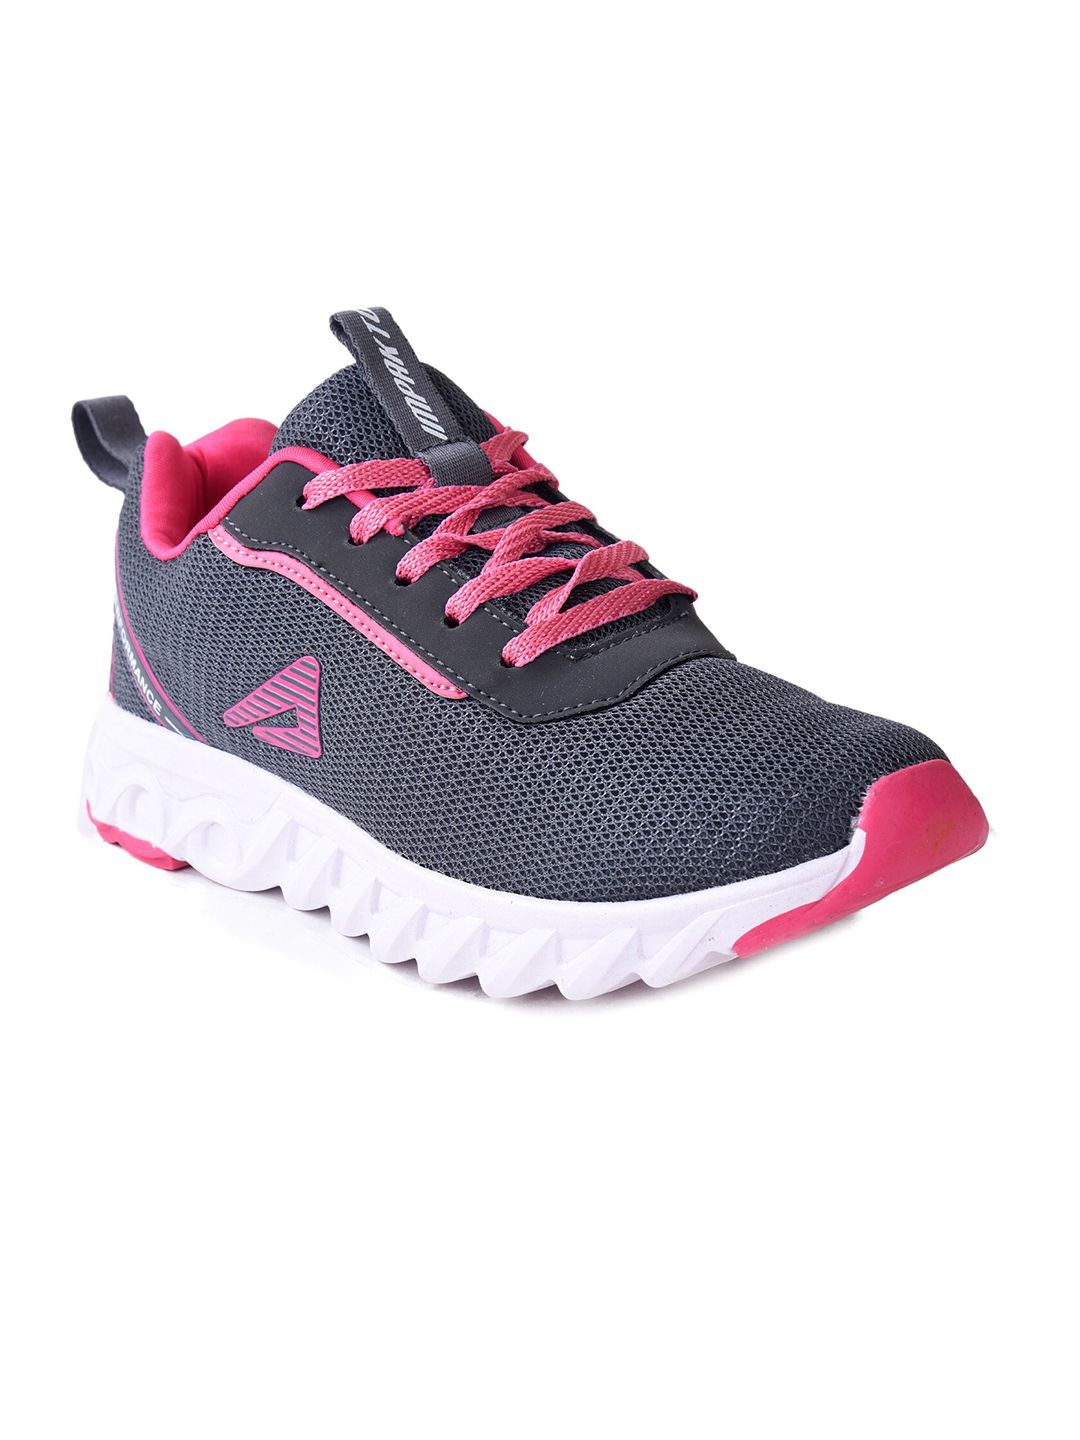 IMPAKTO Women Grey Mesh Running Non-Marking Lace-Up Sports Shoes Price in India